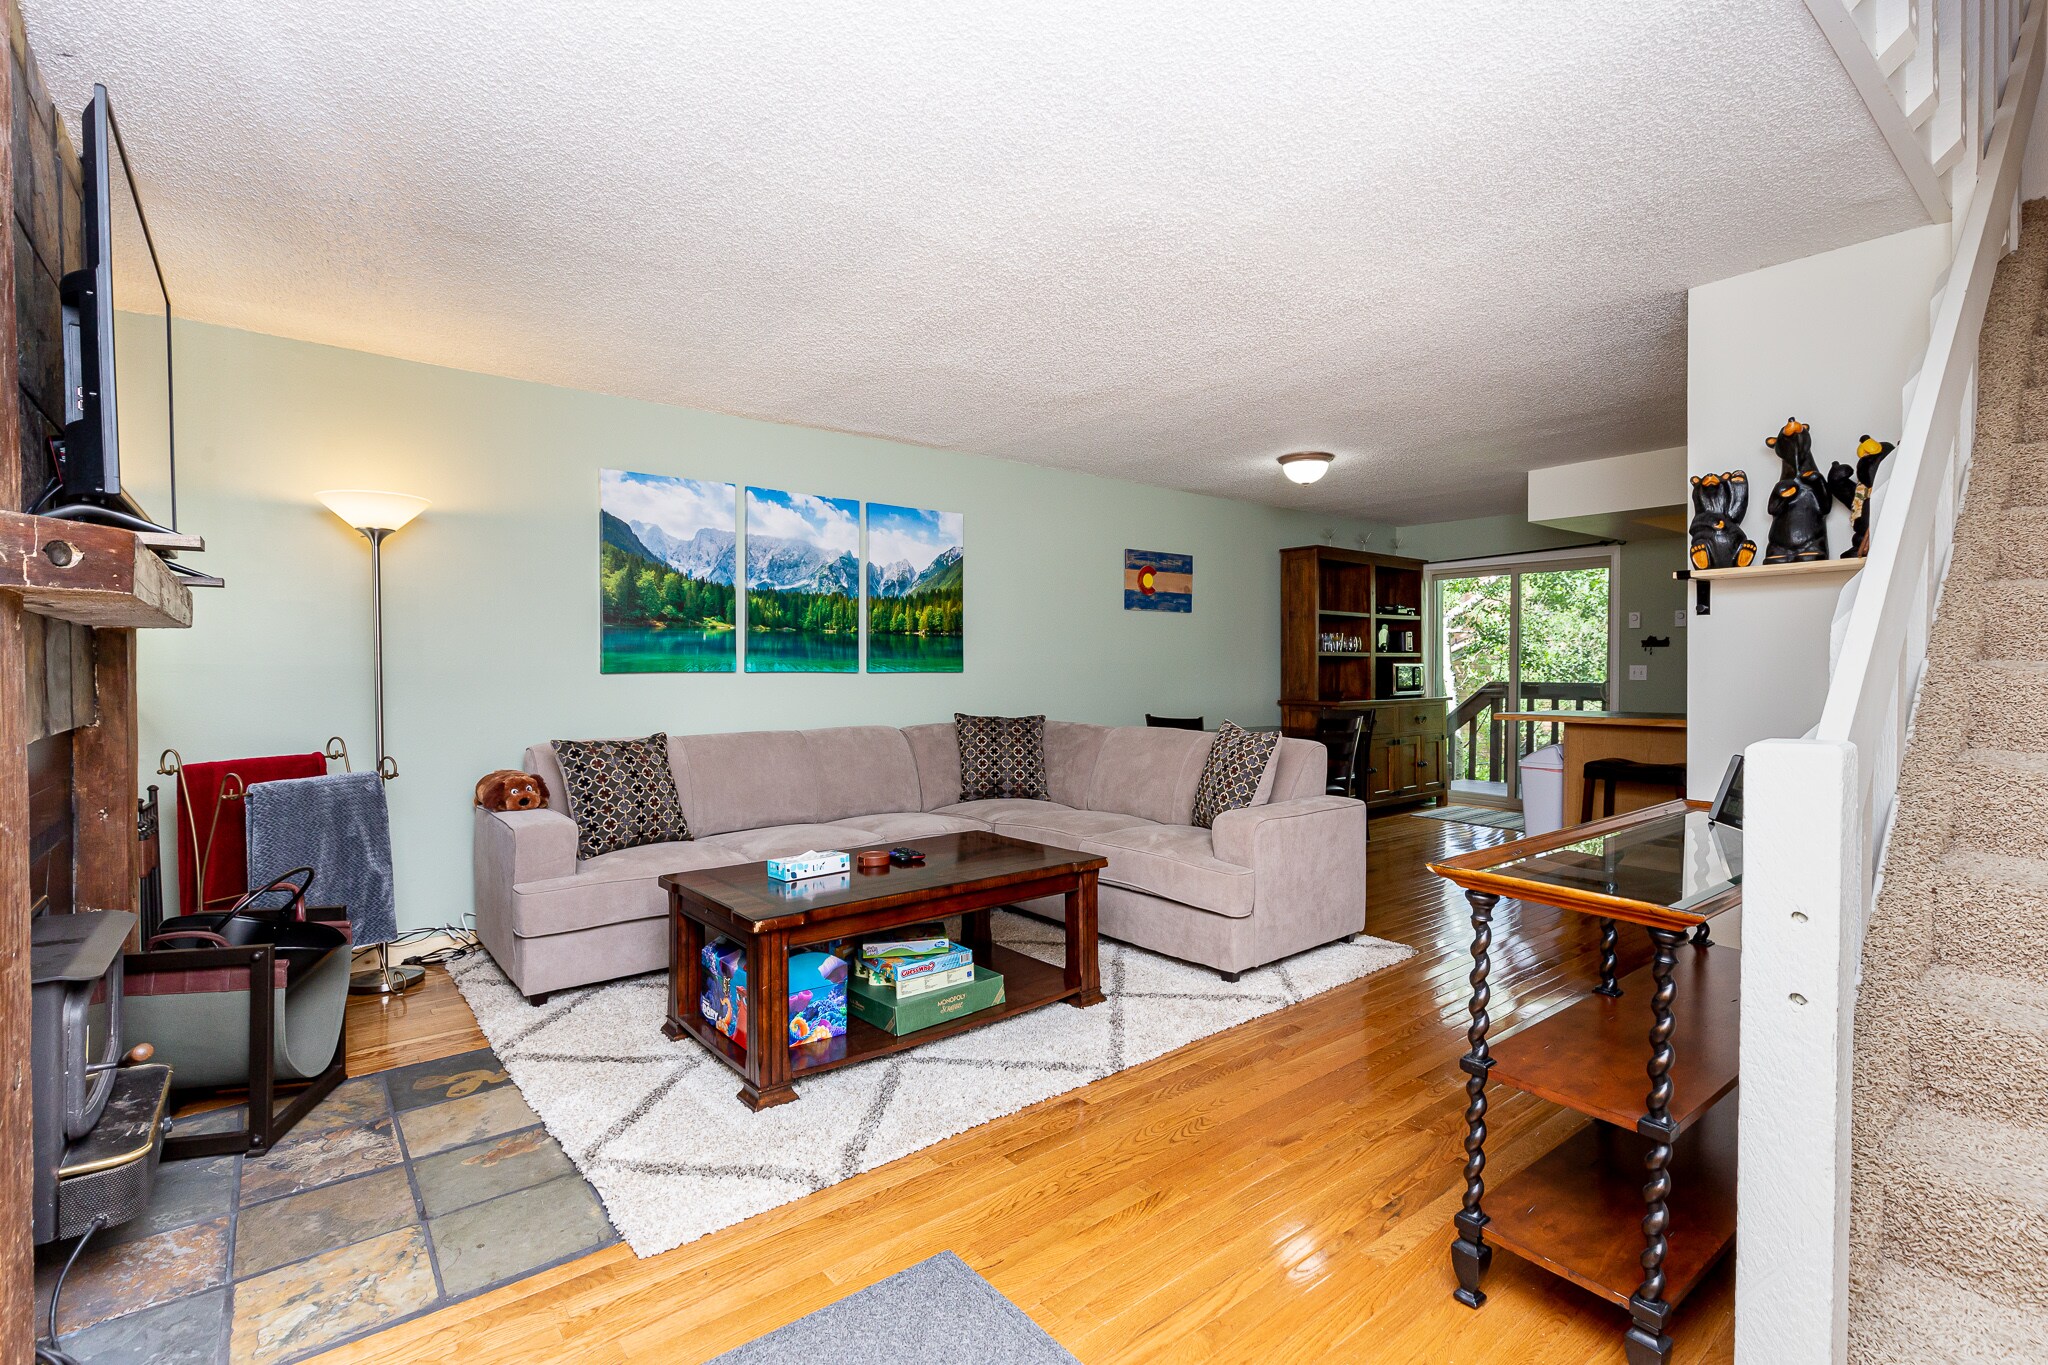 The living area features comfortable seating and a mounted flat screen TV.